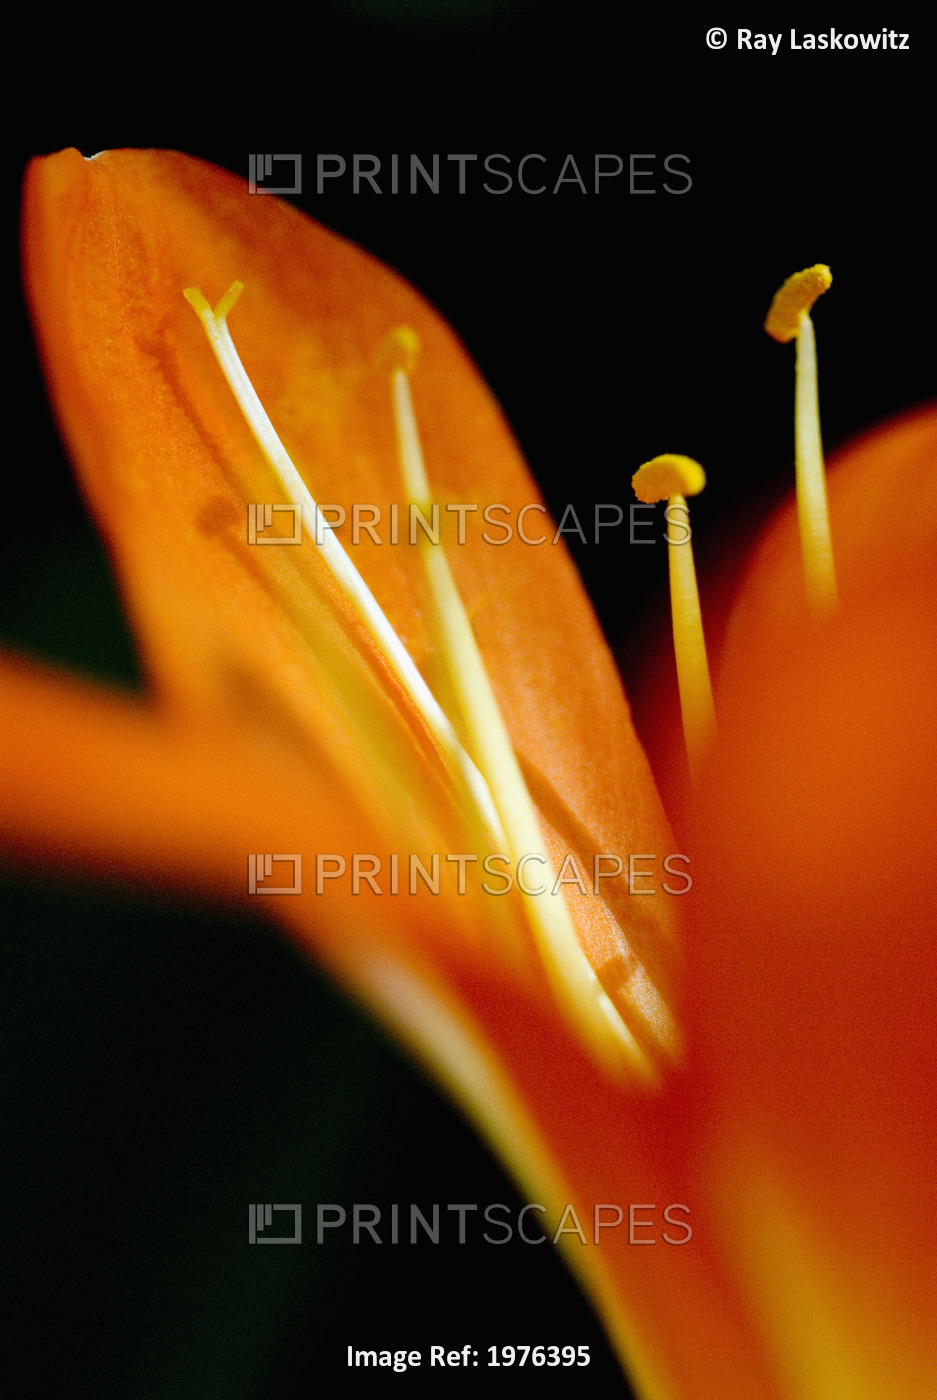 Extreme Close-Up Of Orange Day Lily Petals.